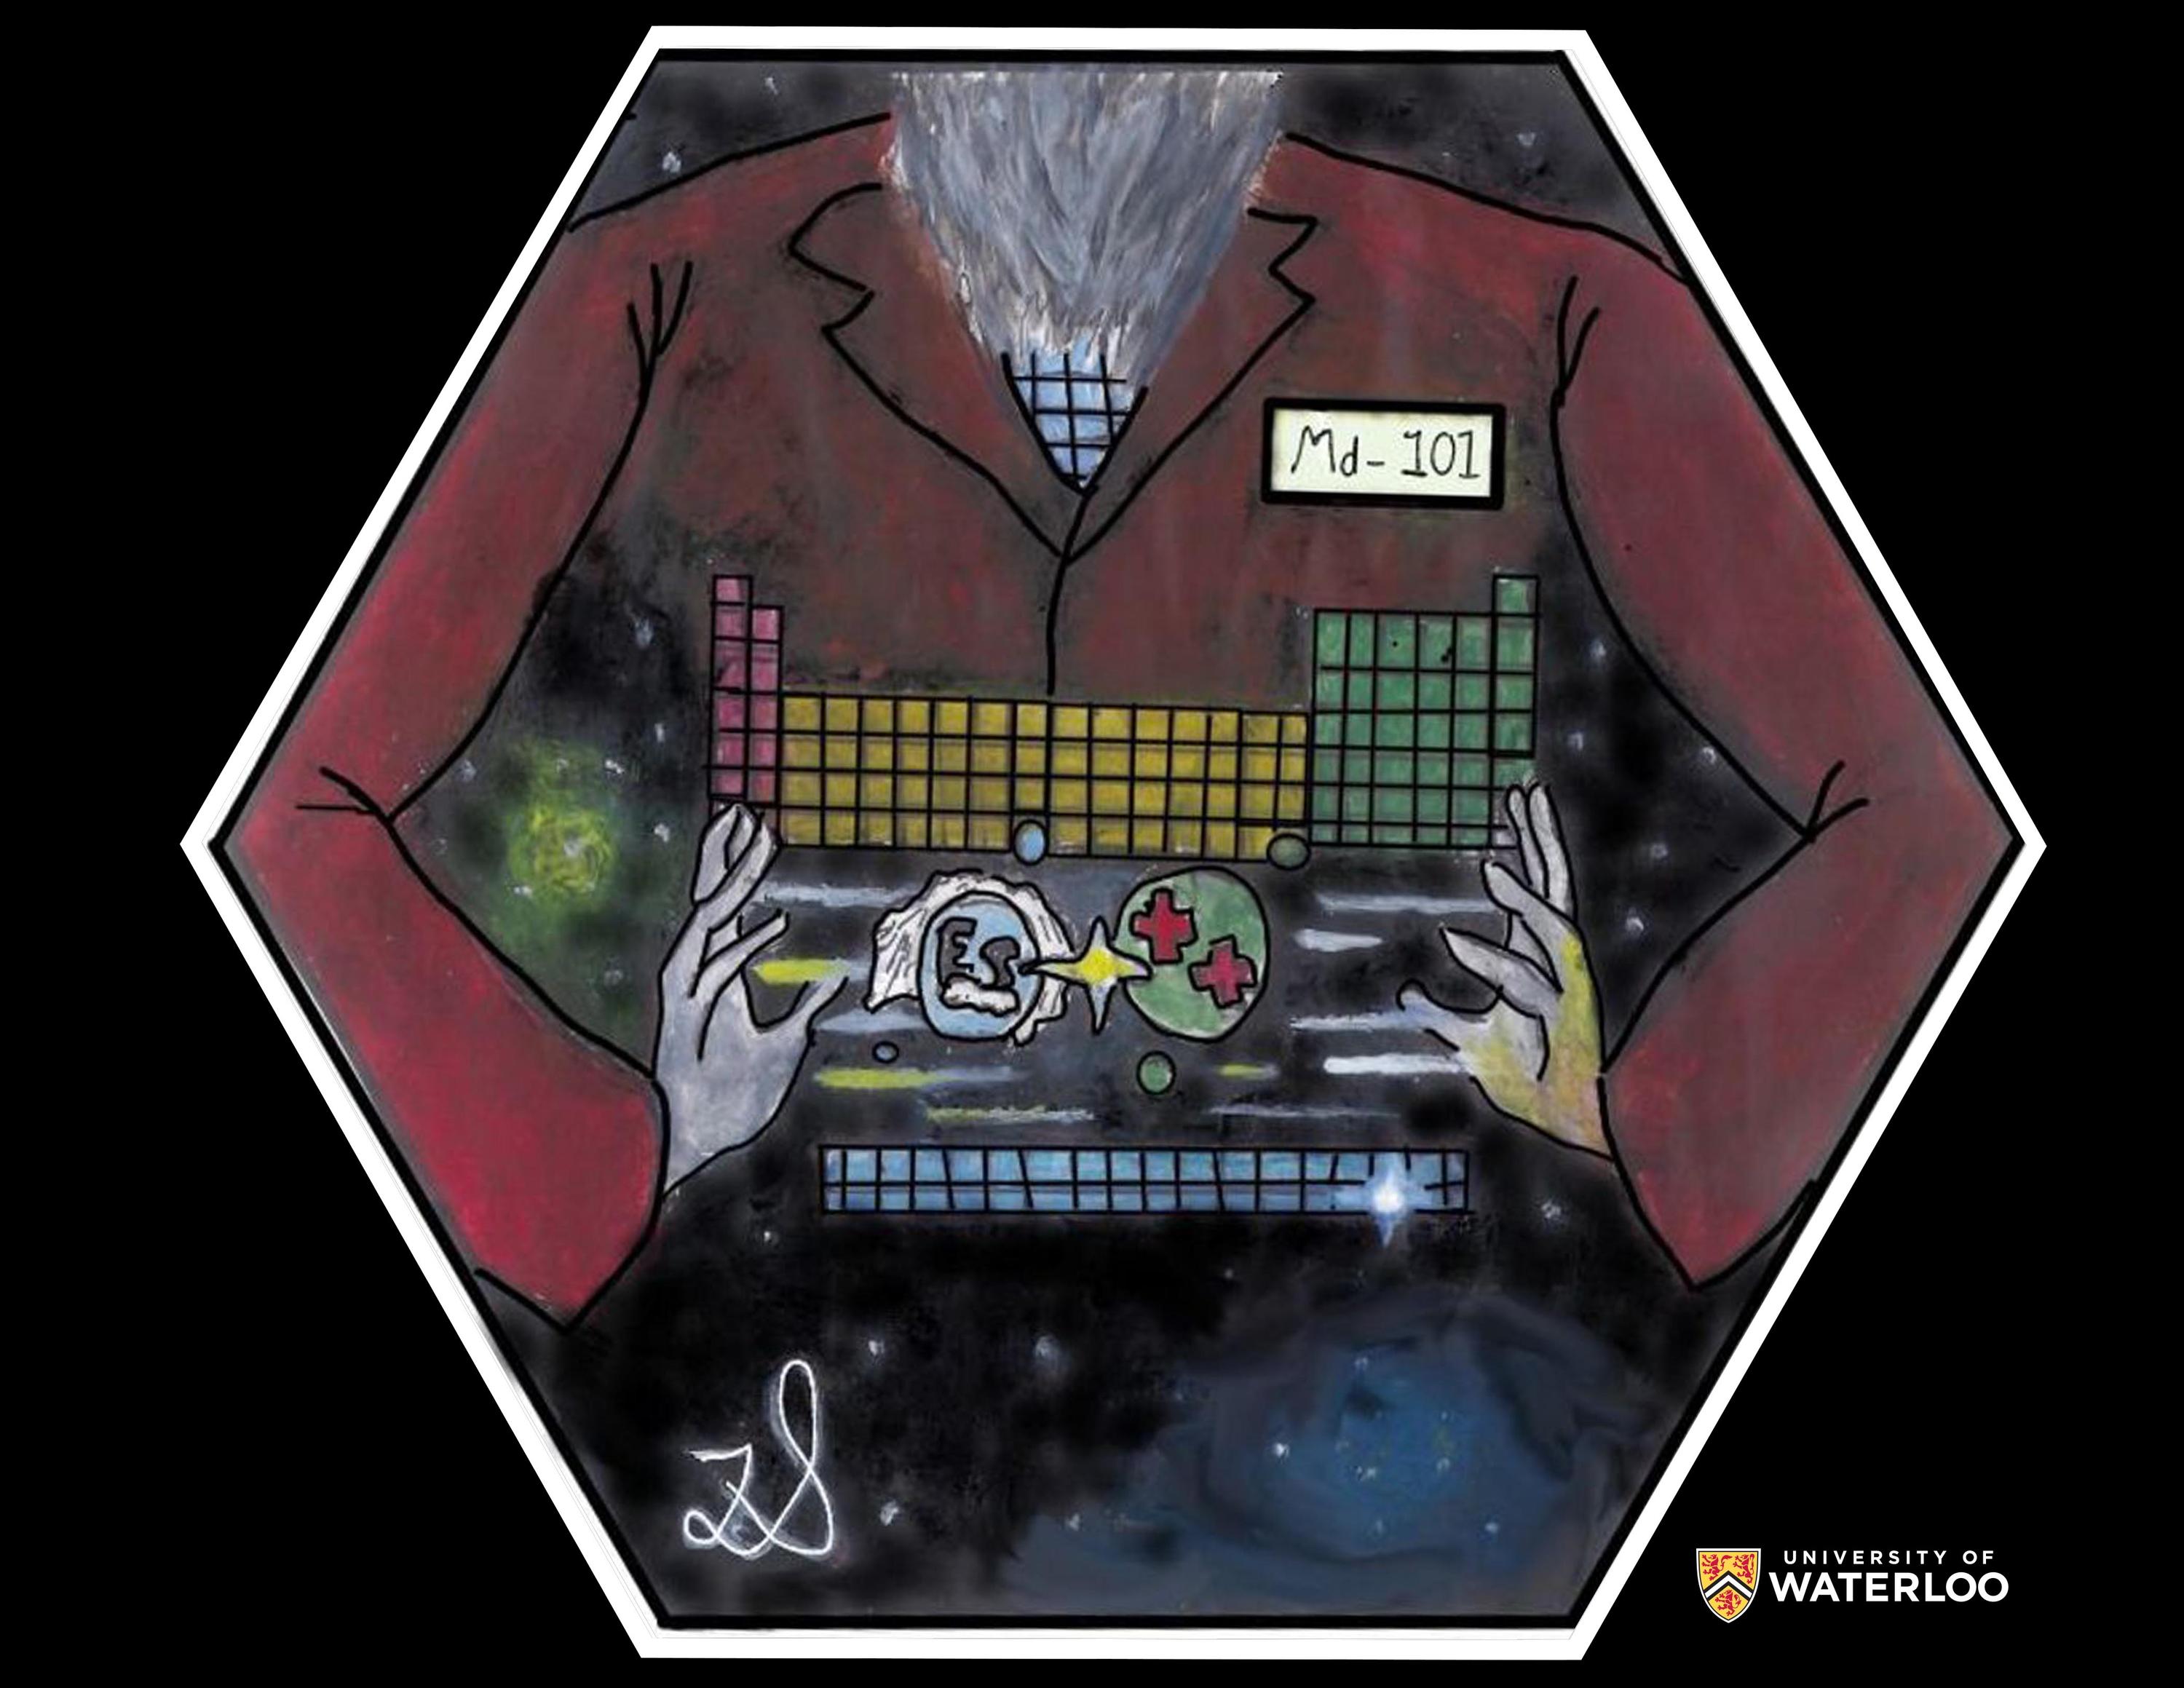 Acrylic, watercolour and digital composite. A bearded man suspended in outer space is illustrated from neck to waist holding a miniature particle accelerator in which einsteinium and alpha particles are colliding. Behind the accelerator is a small periodic table made up of simple coloured blocks. The man is suspended in outer space.